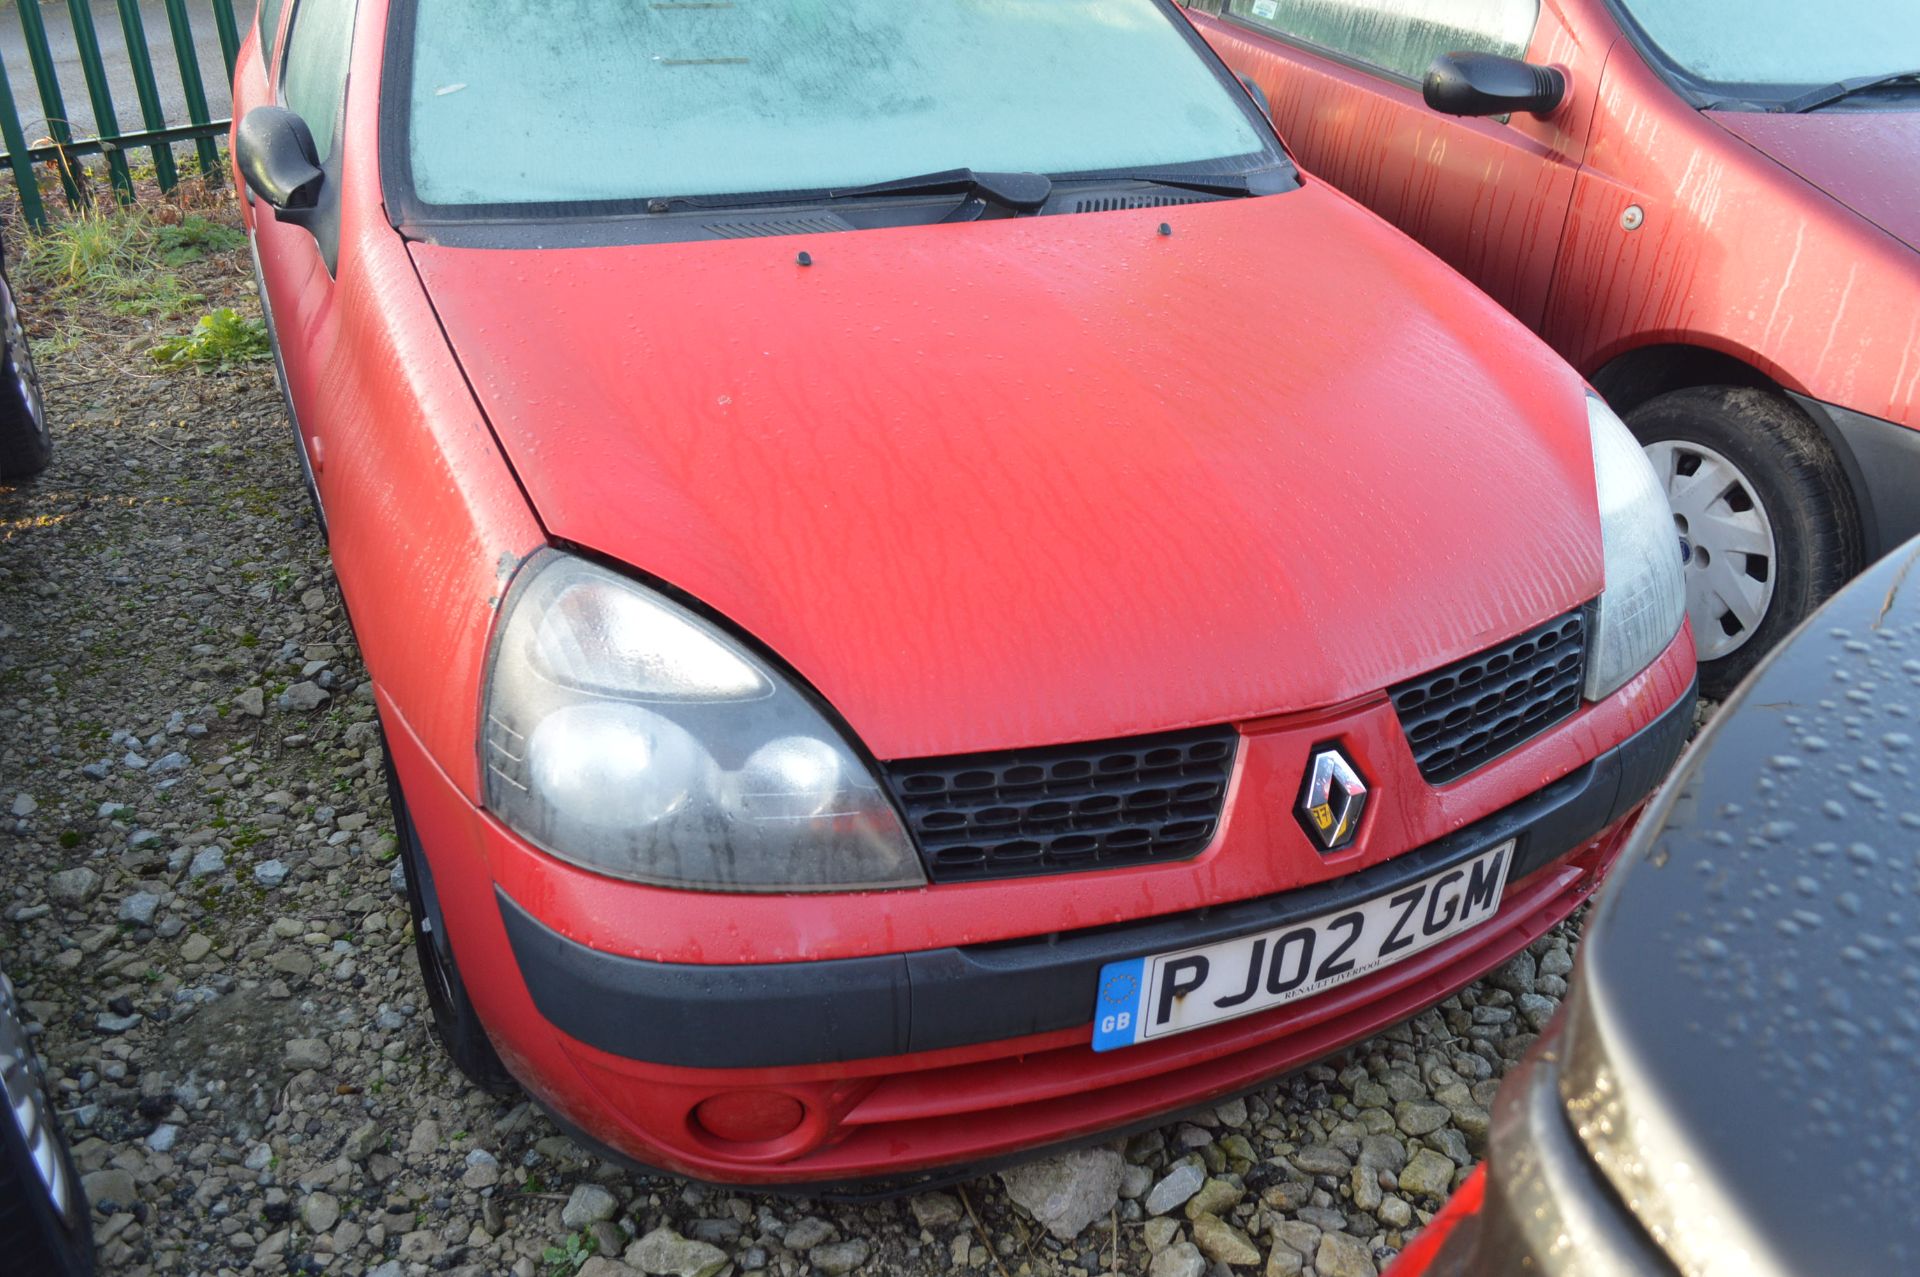 2002/02 REG RENAULT CLIO EXPRESSION 16V - SELLING AS SPARES / REPAIRS *NO VAT*   DATE OF - Image 3 of 9